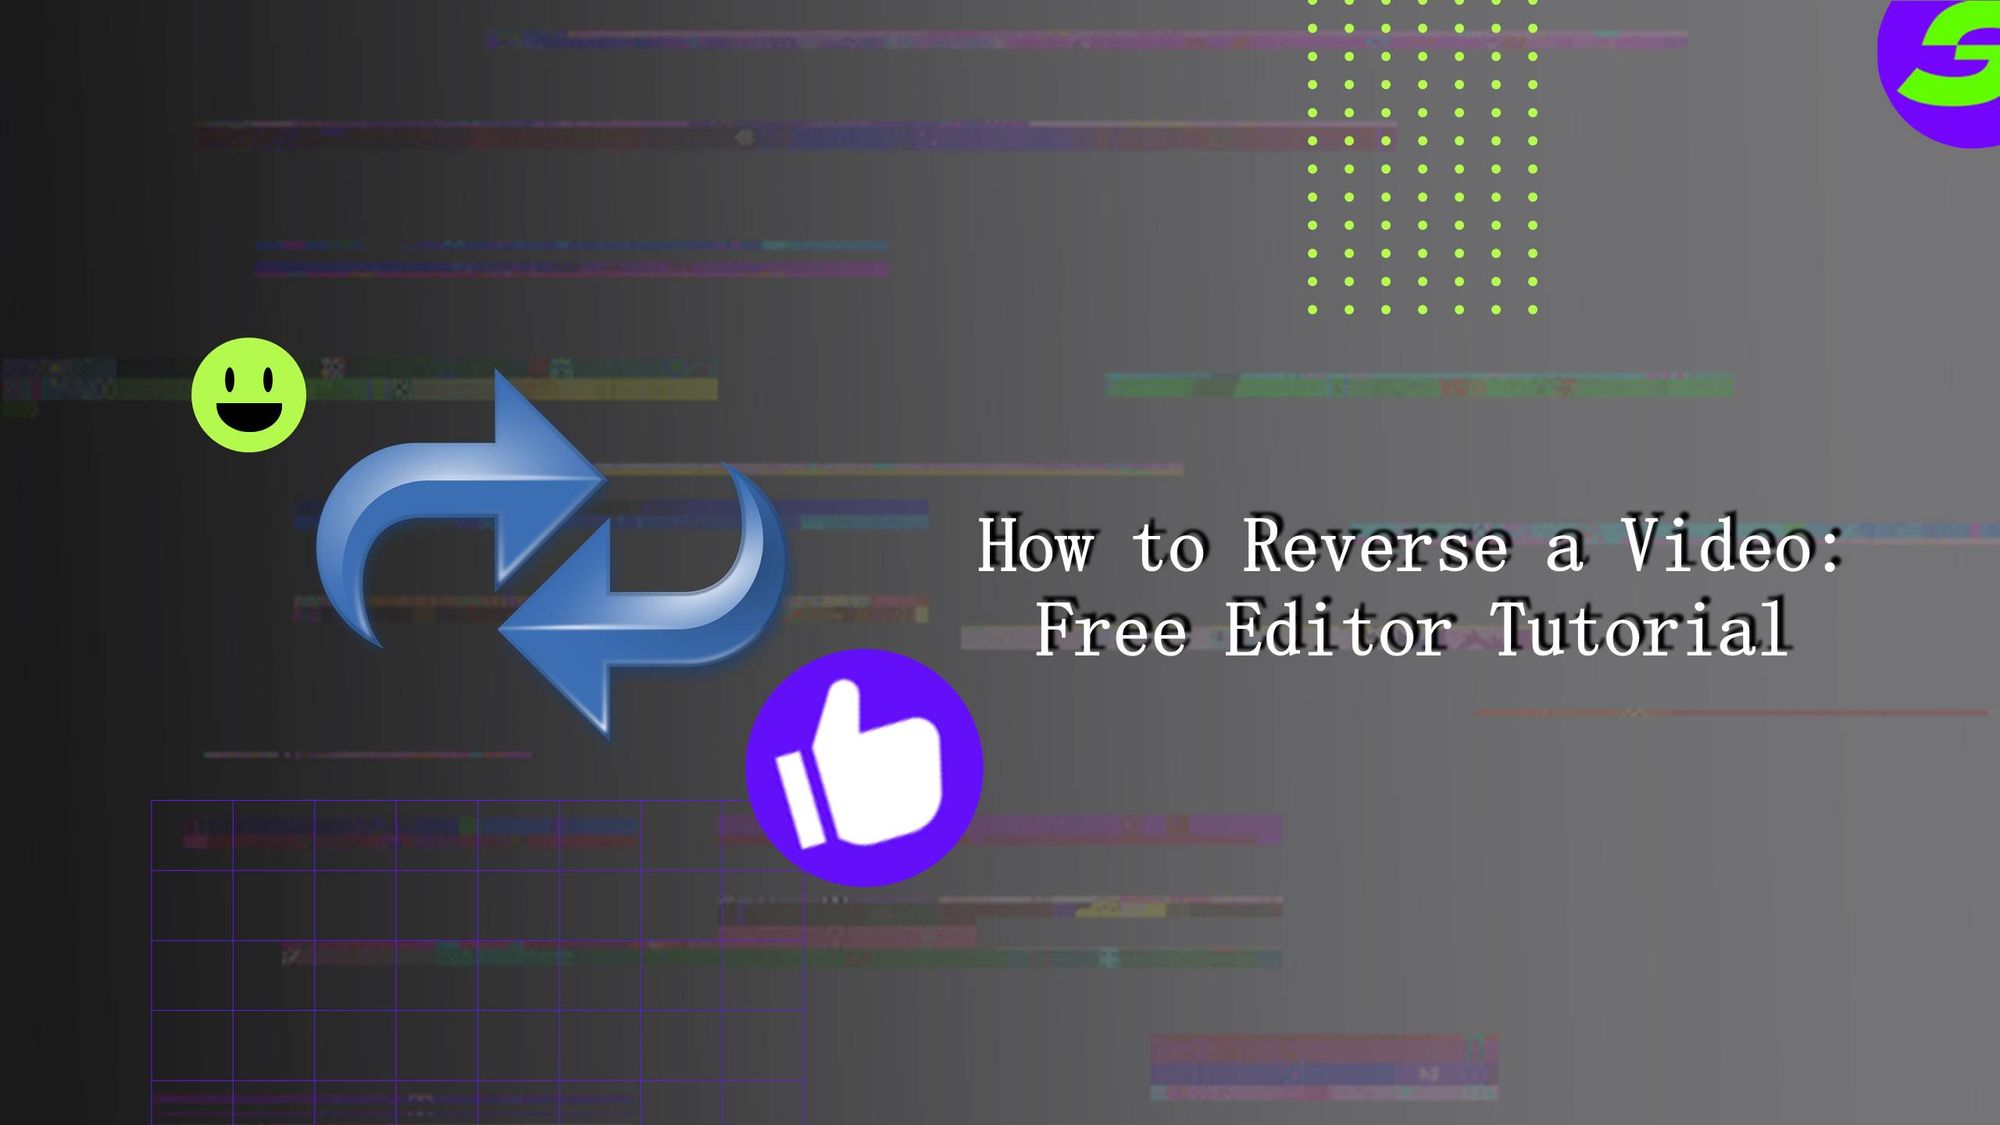 Step-by-Step Guide: How to reverse a video like a Pro